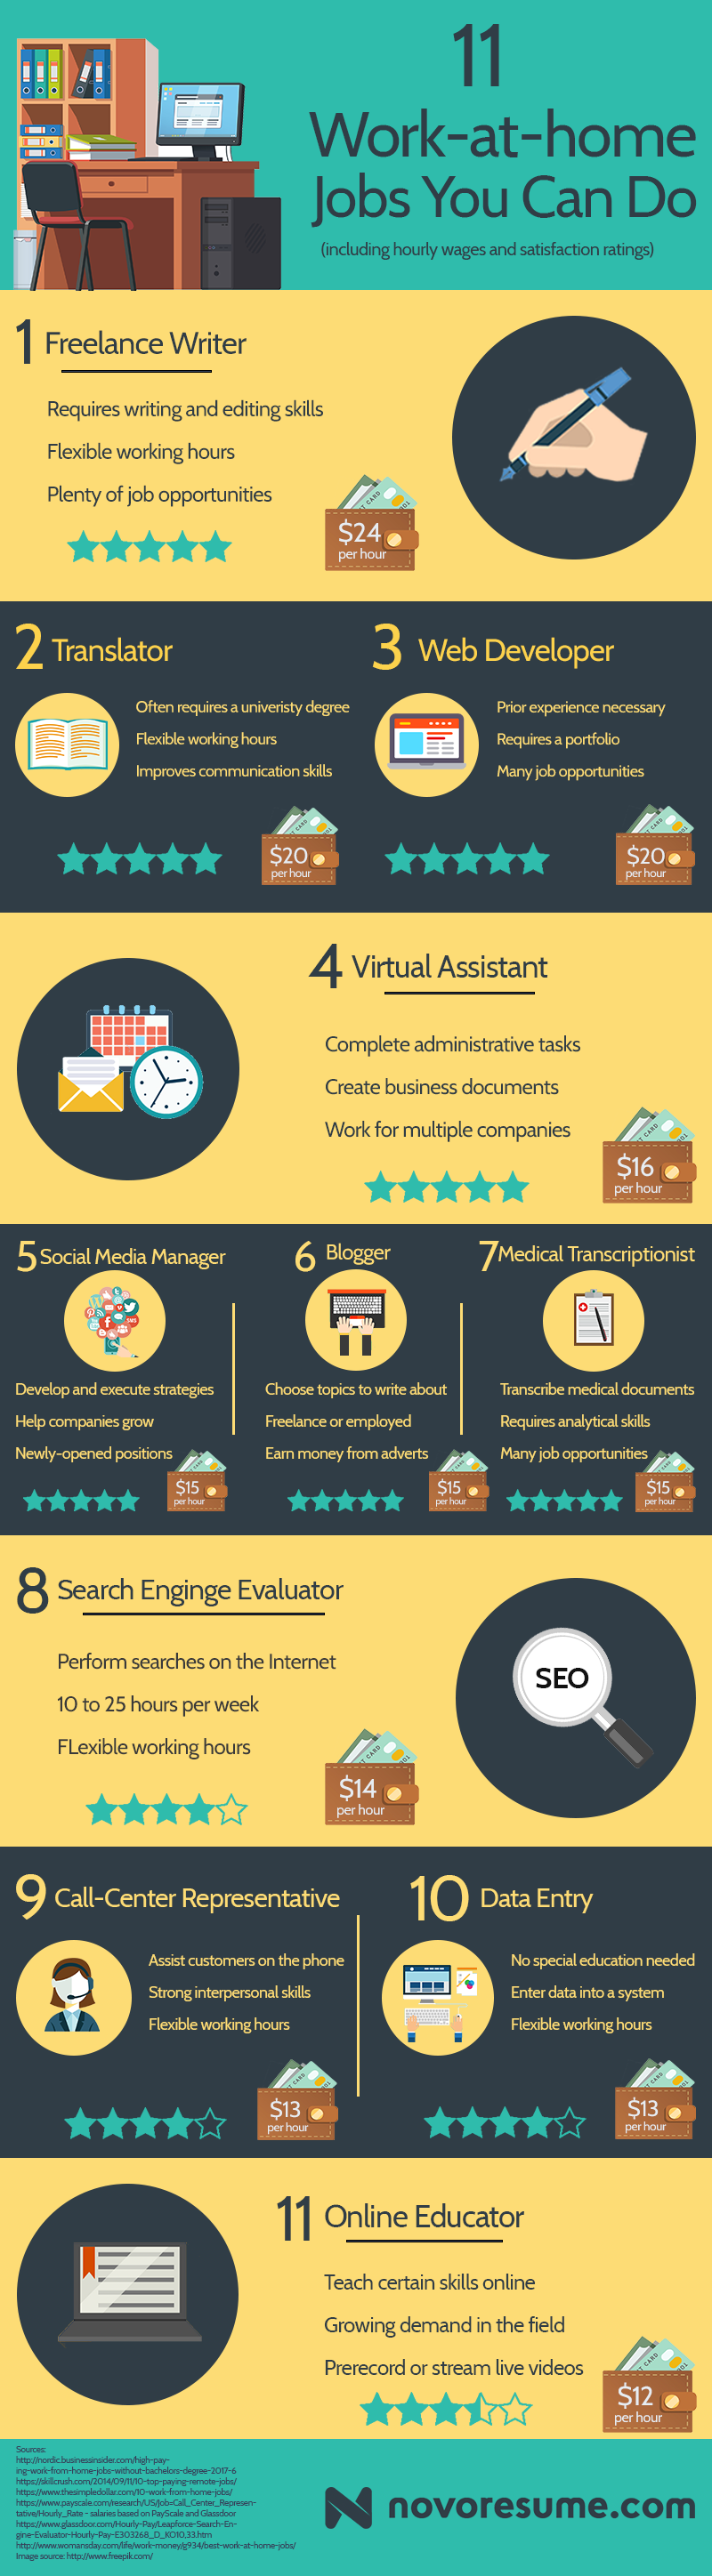 Infographic - 11 Work-at-home Jobs You Can Do